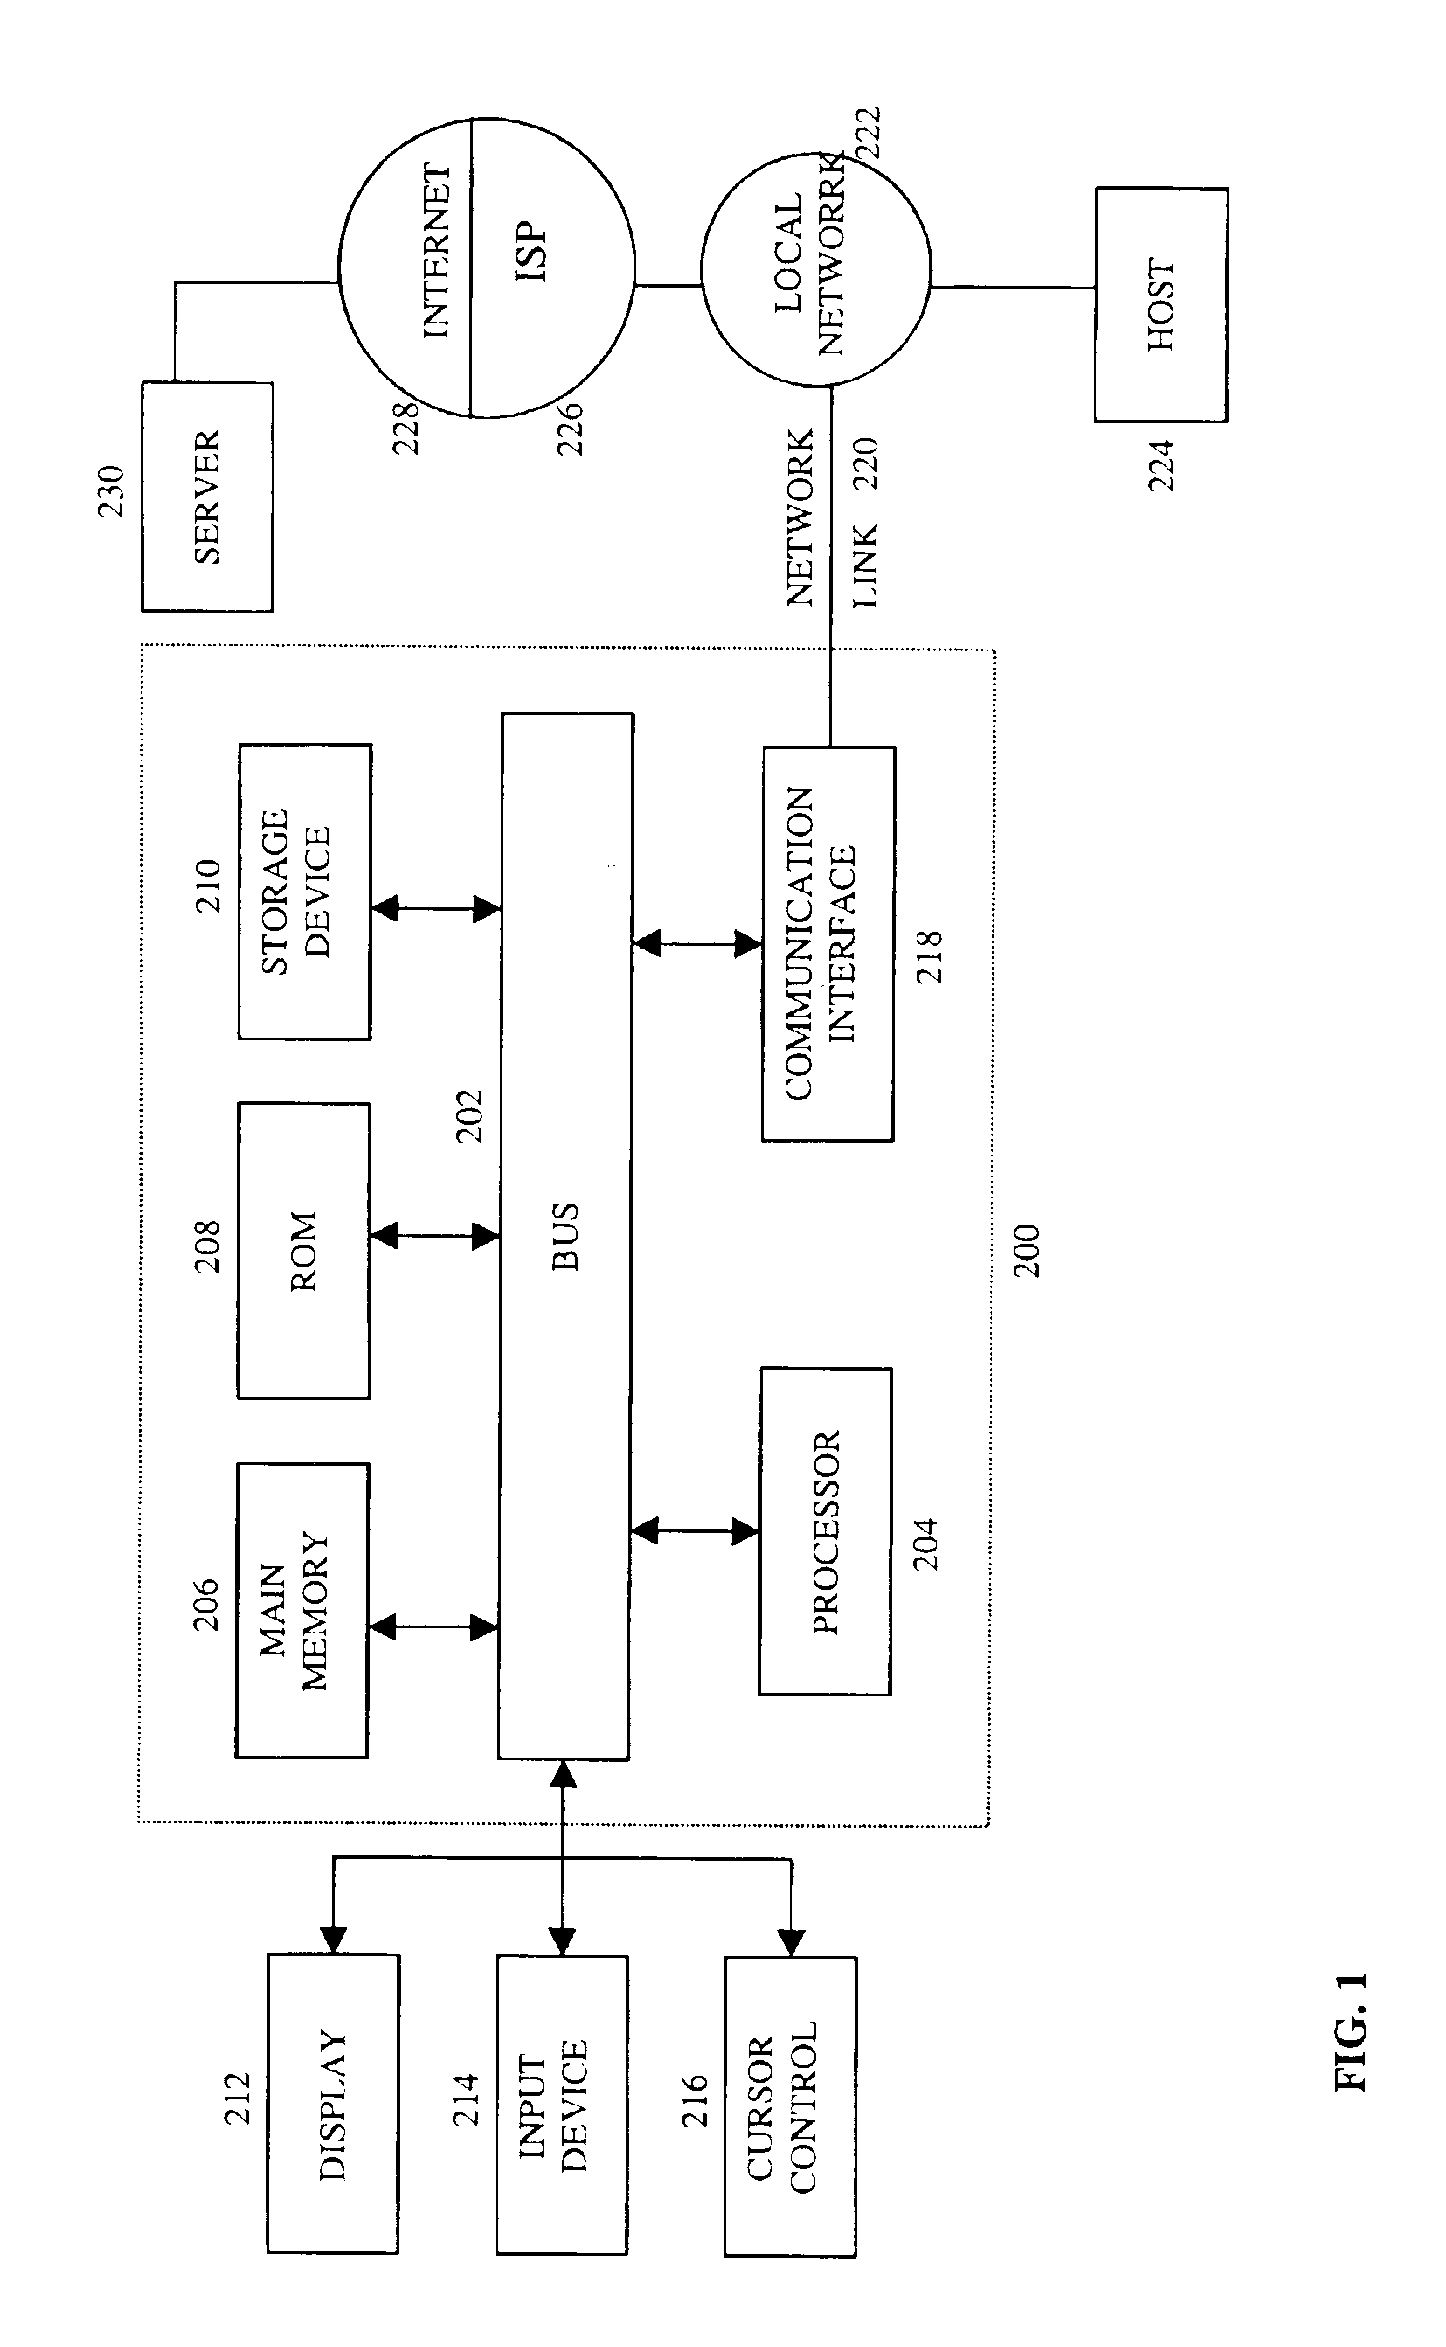 Method and system to flexibly calculate hydraulics and hydrology of watersheds automatically